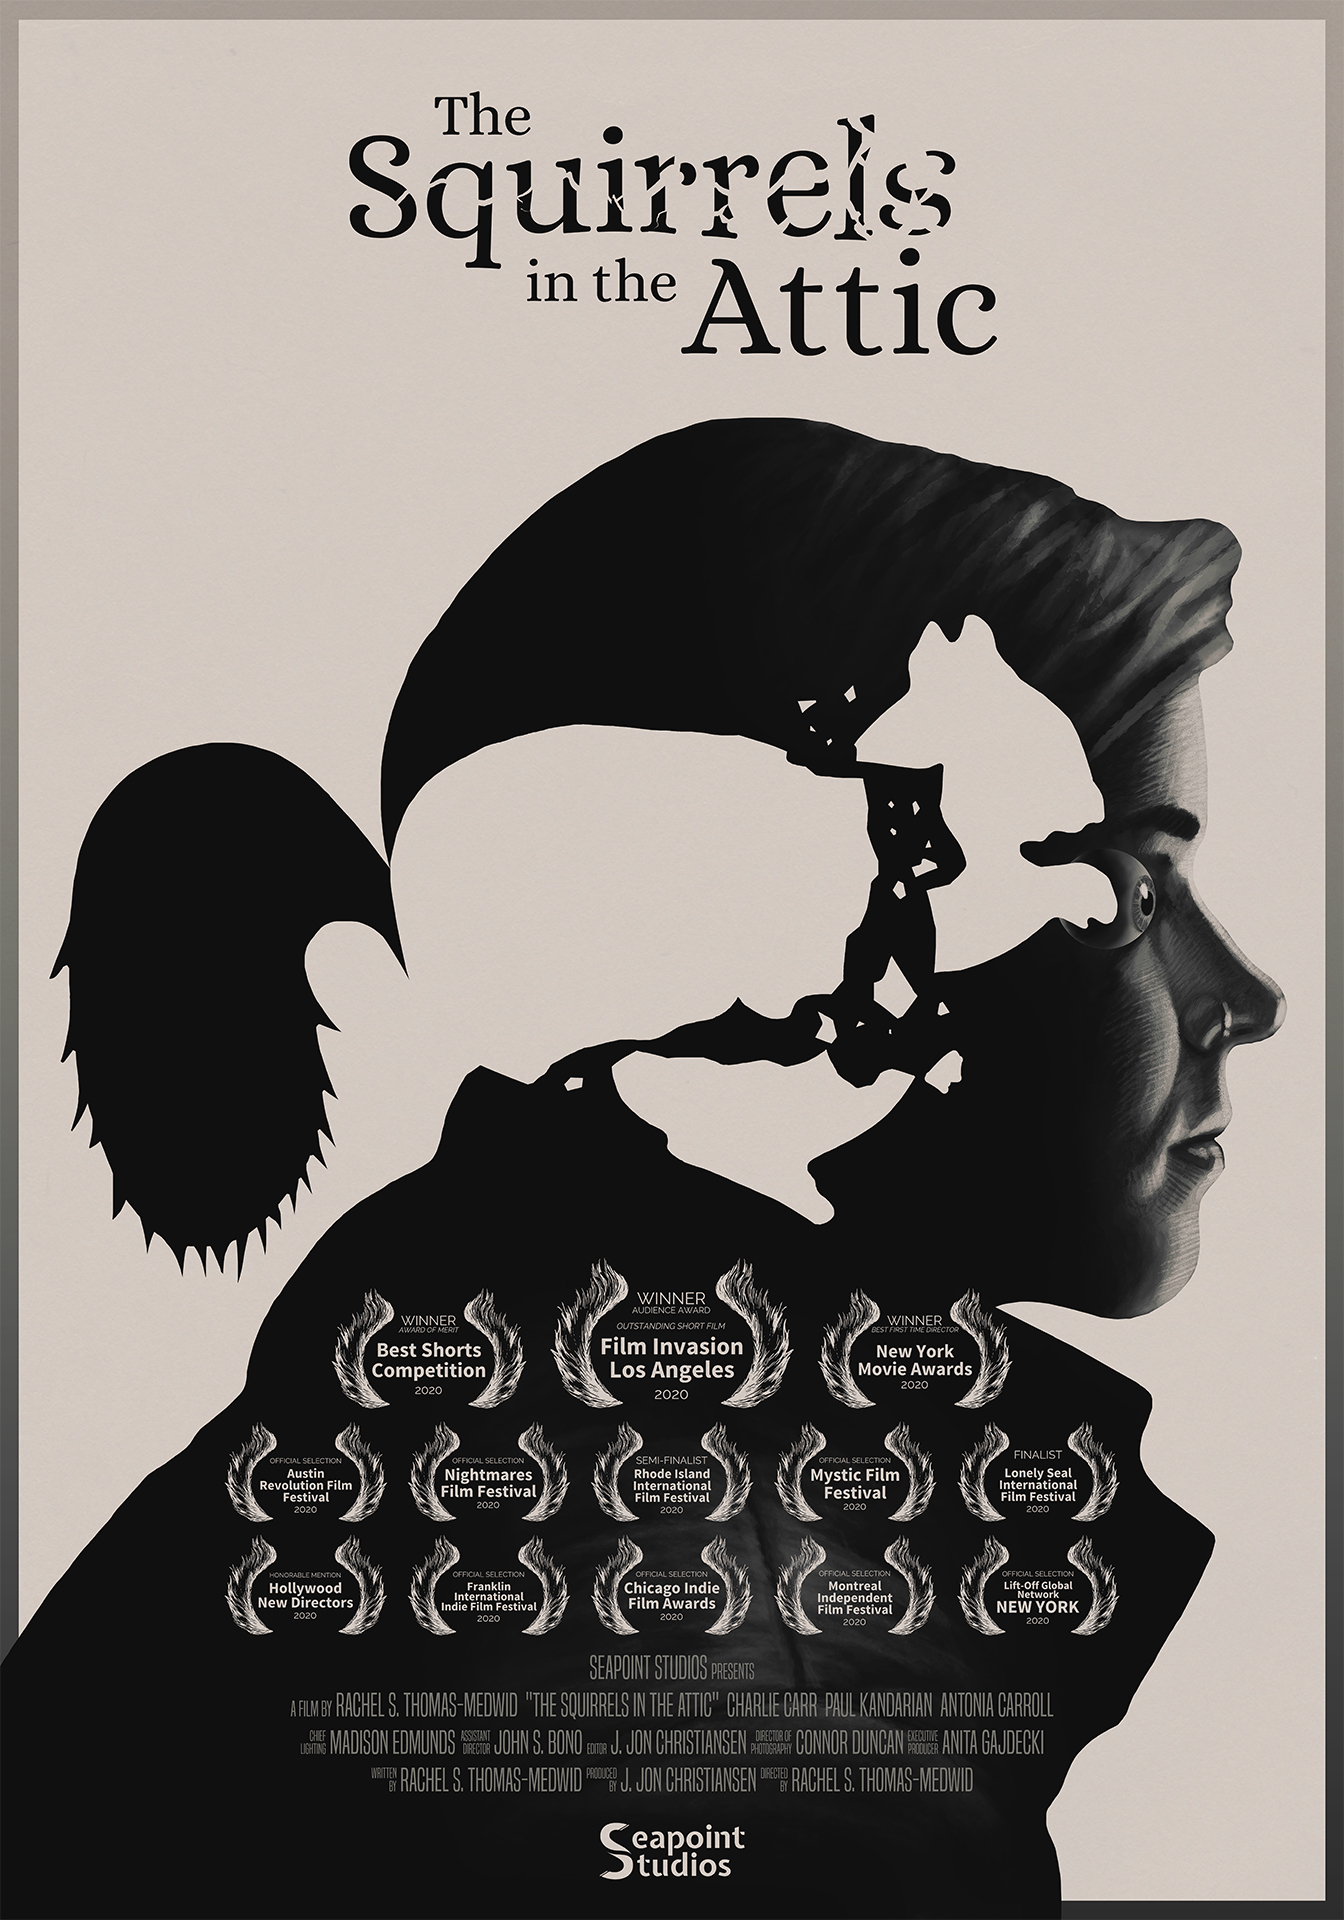 Official poster of the awarding winning short film The Squirrels in the Attic